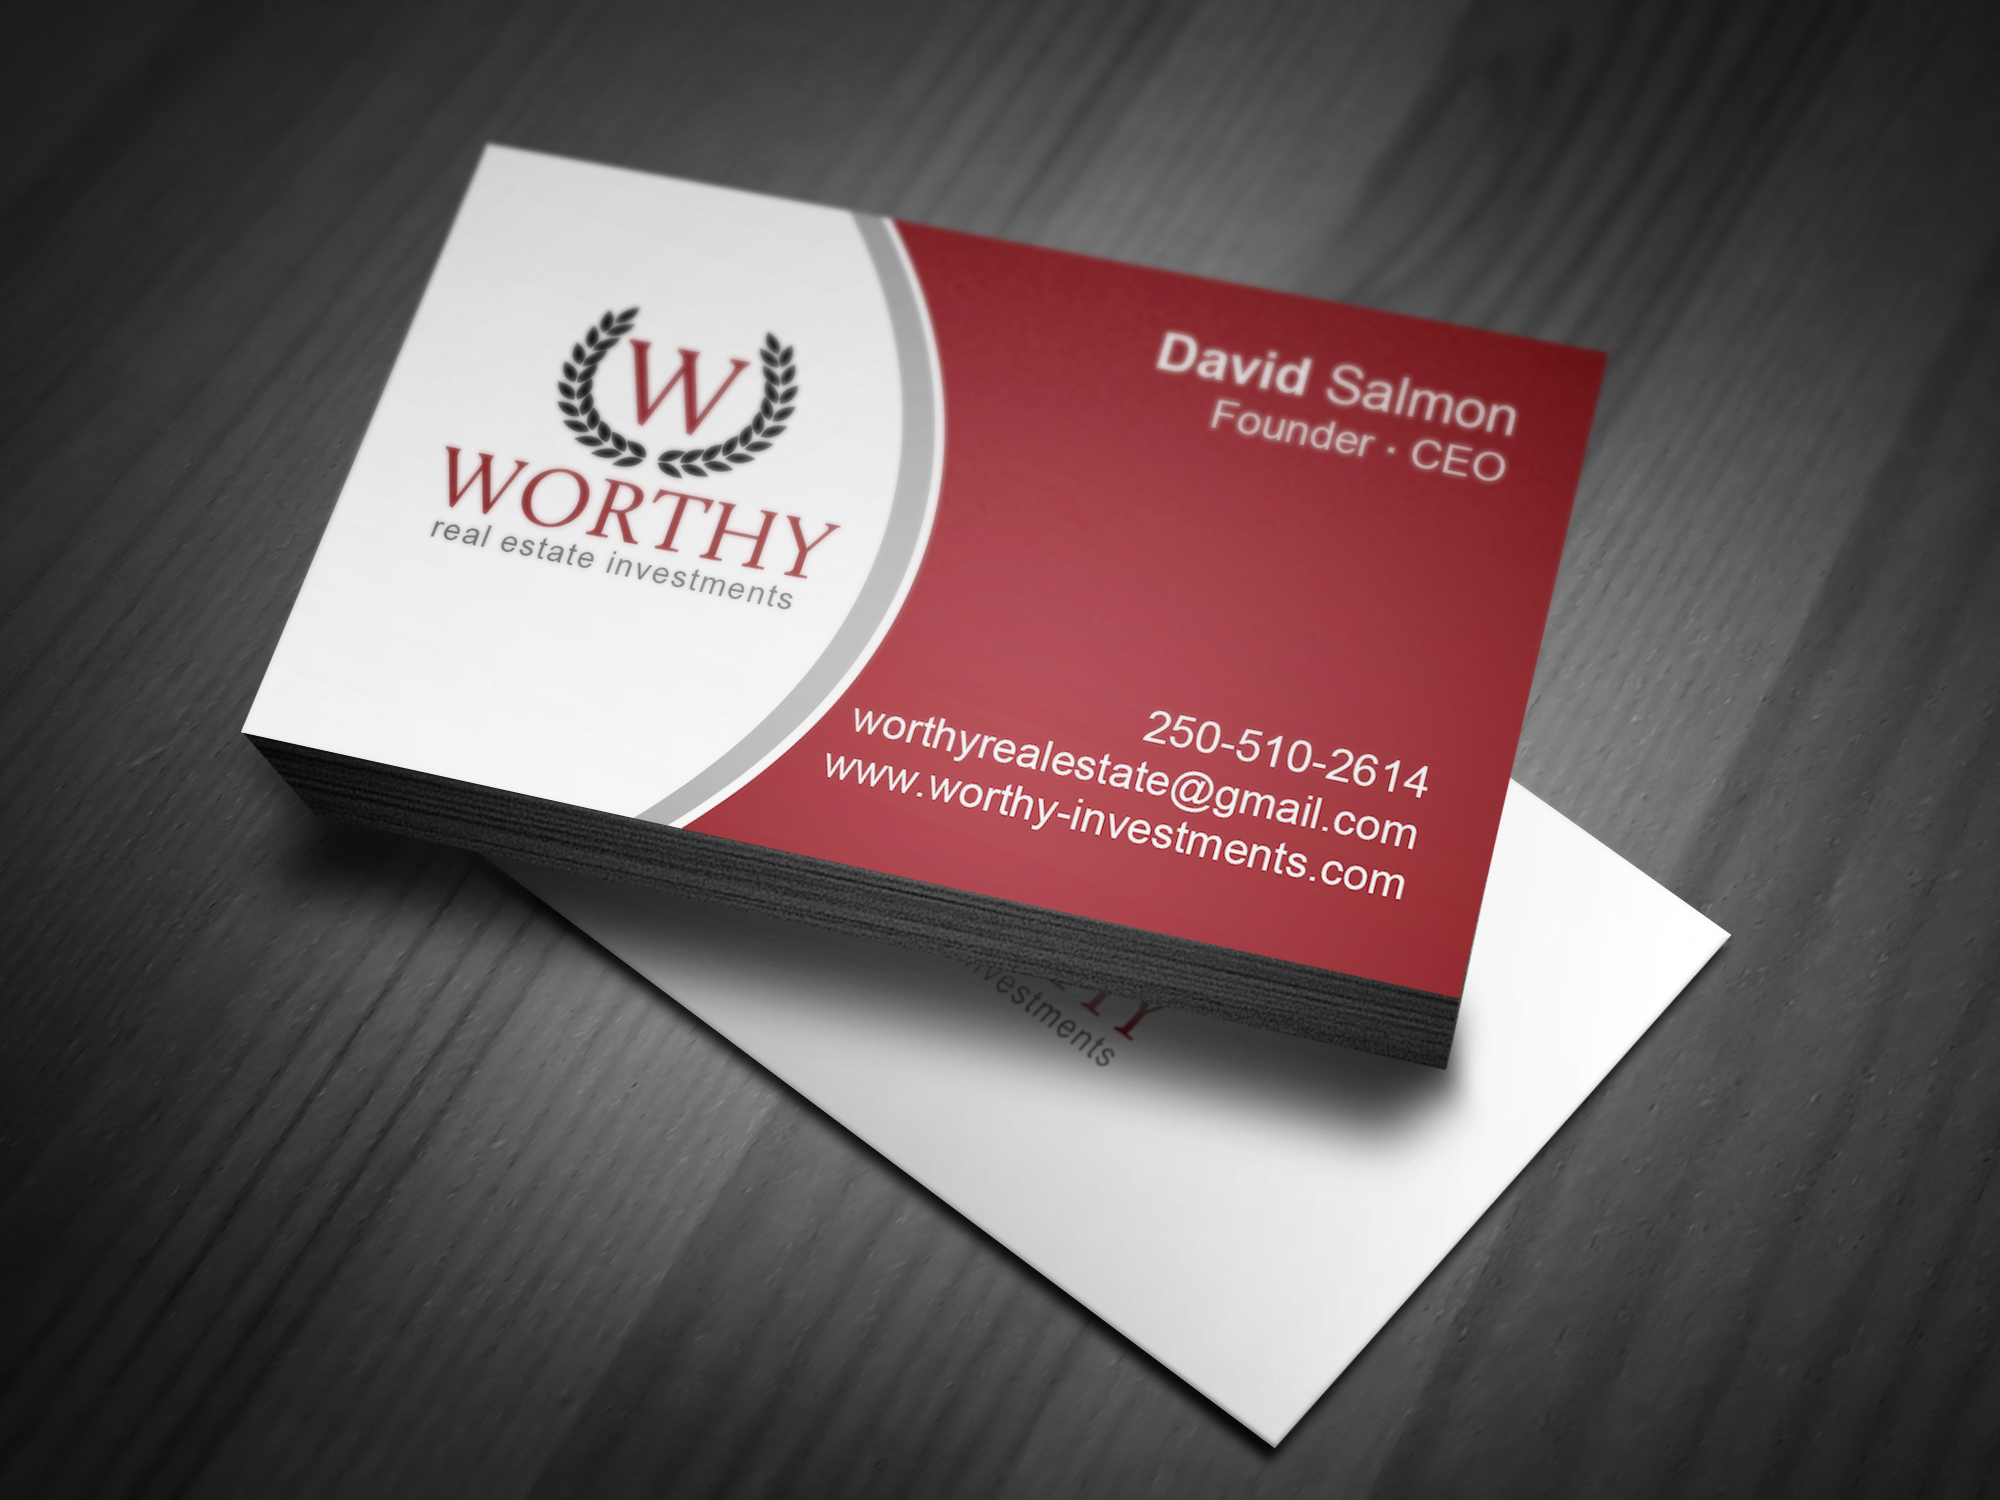 Worthy Real Estate Investments Business Cards